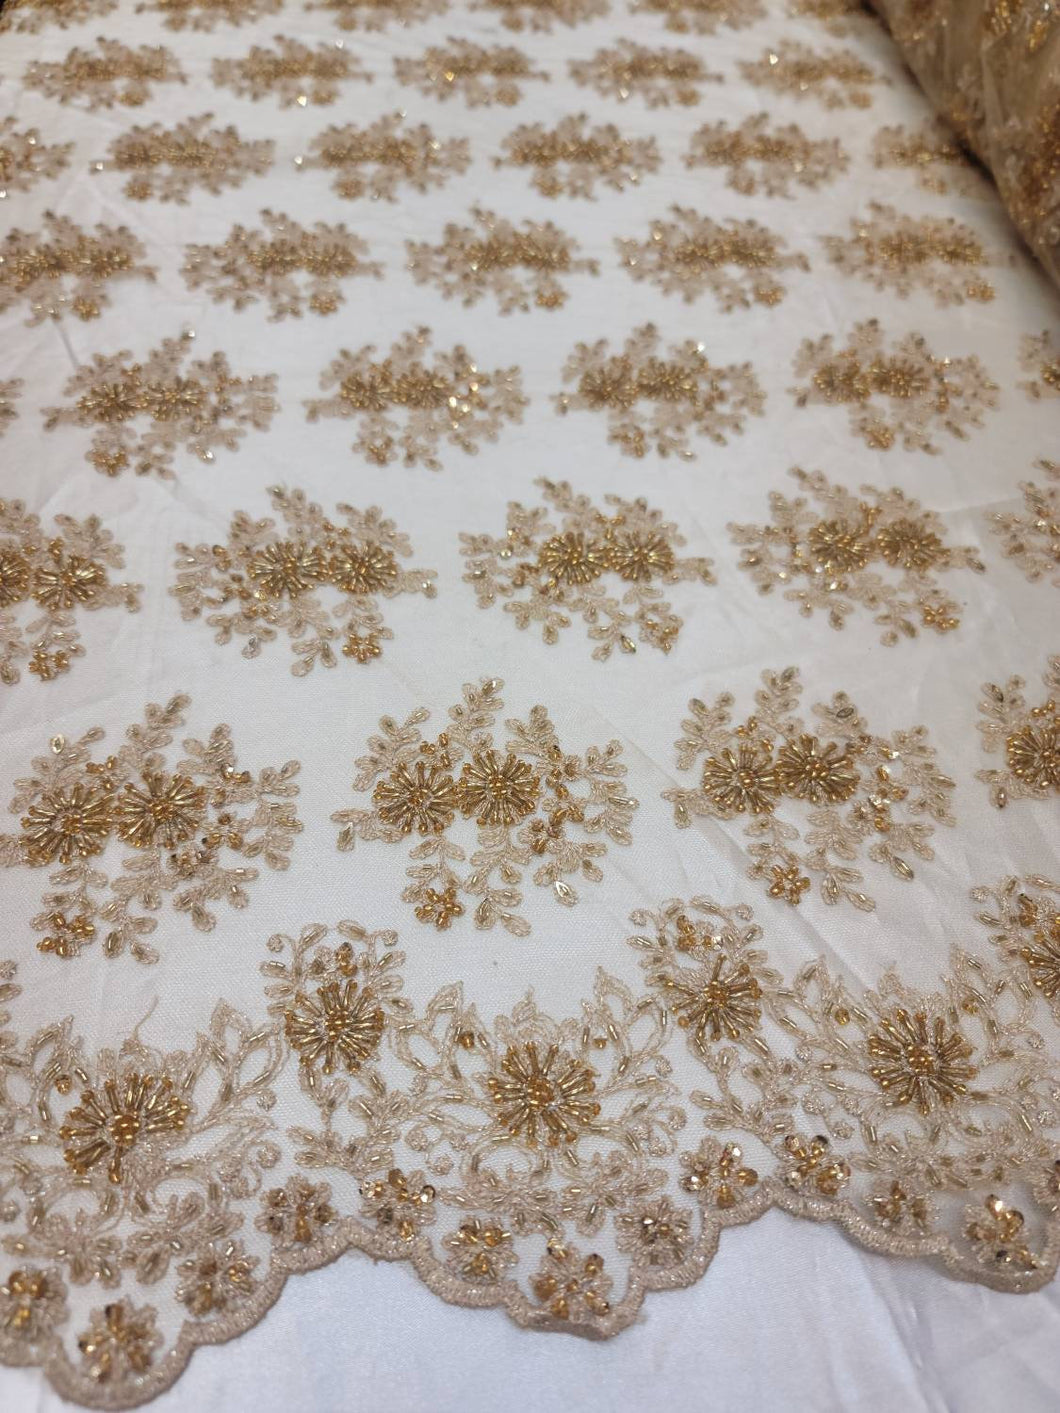 Fabric Sold By The Yard Gold Lace Beads On Mesh Embroidery Sequin Floral Flowers Bridal Evening Dress Fashion Gown Quinceañera Beads Fabric